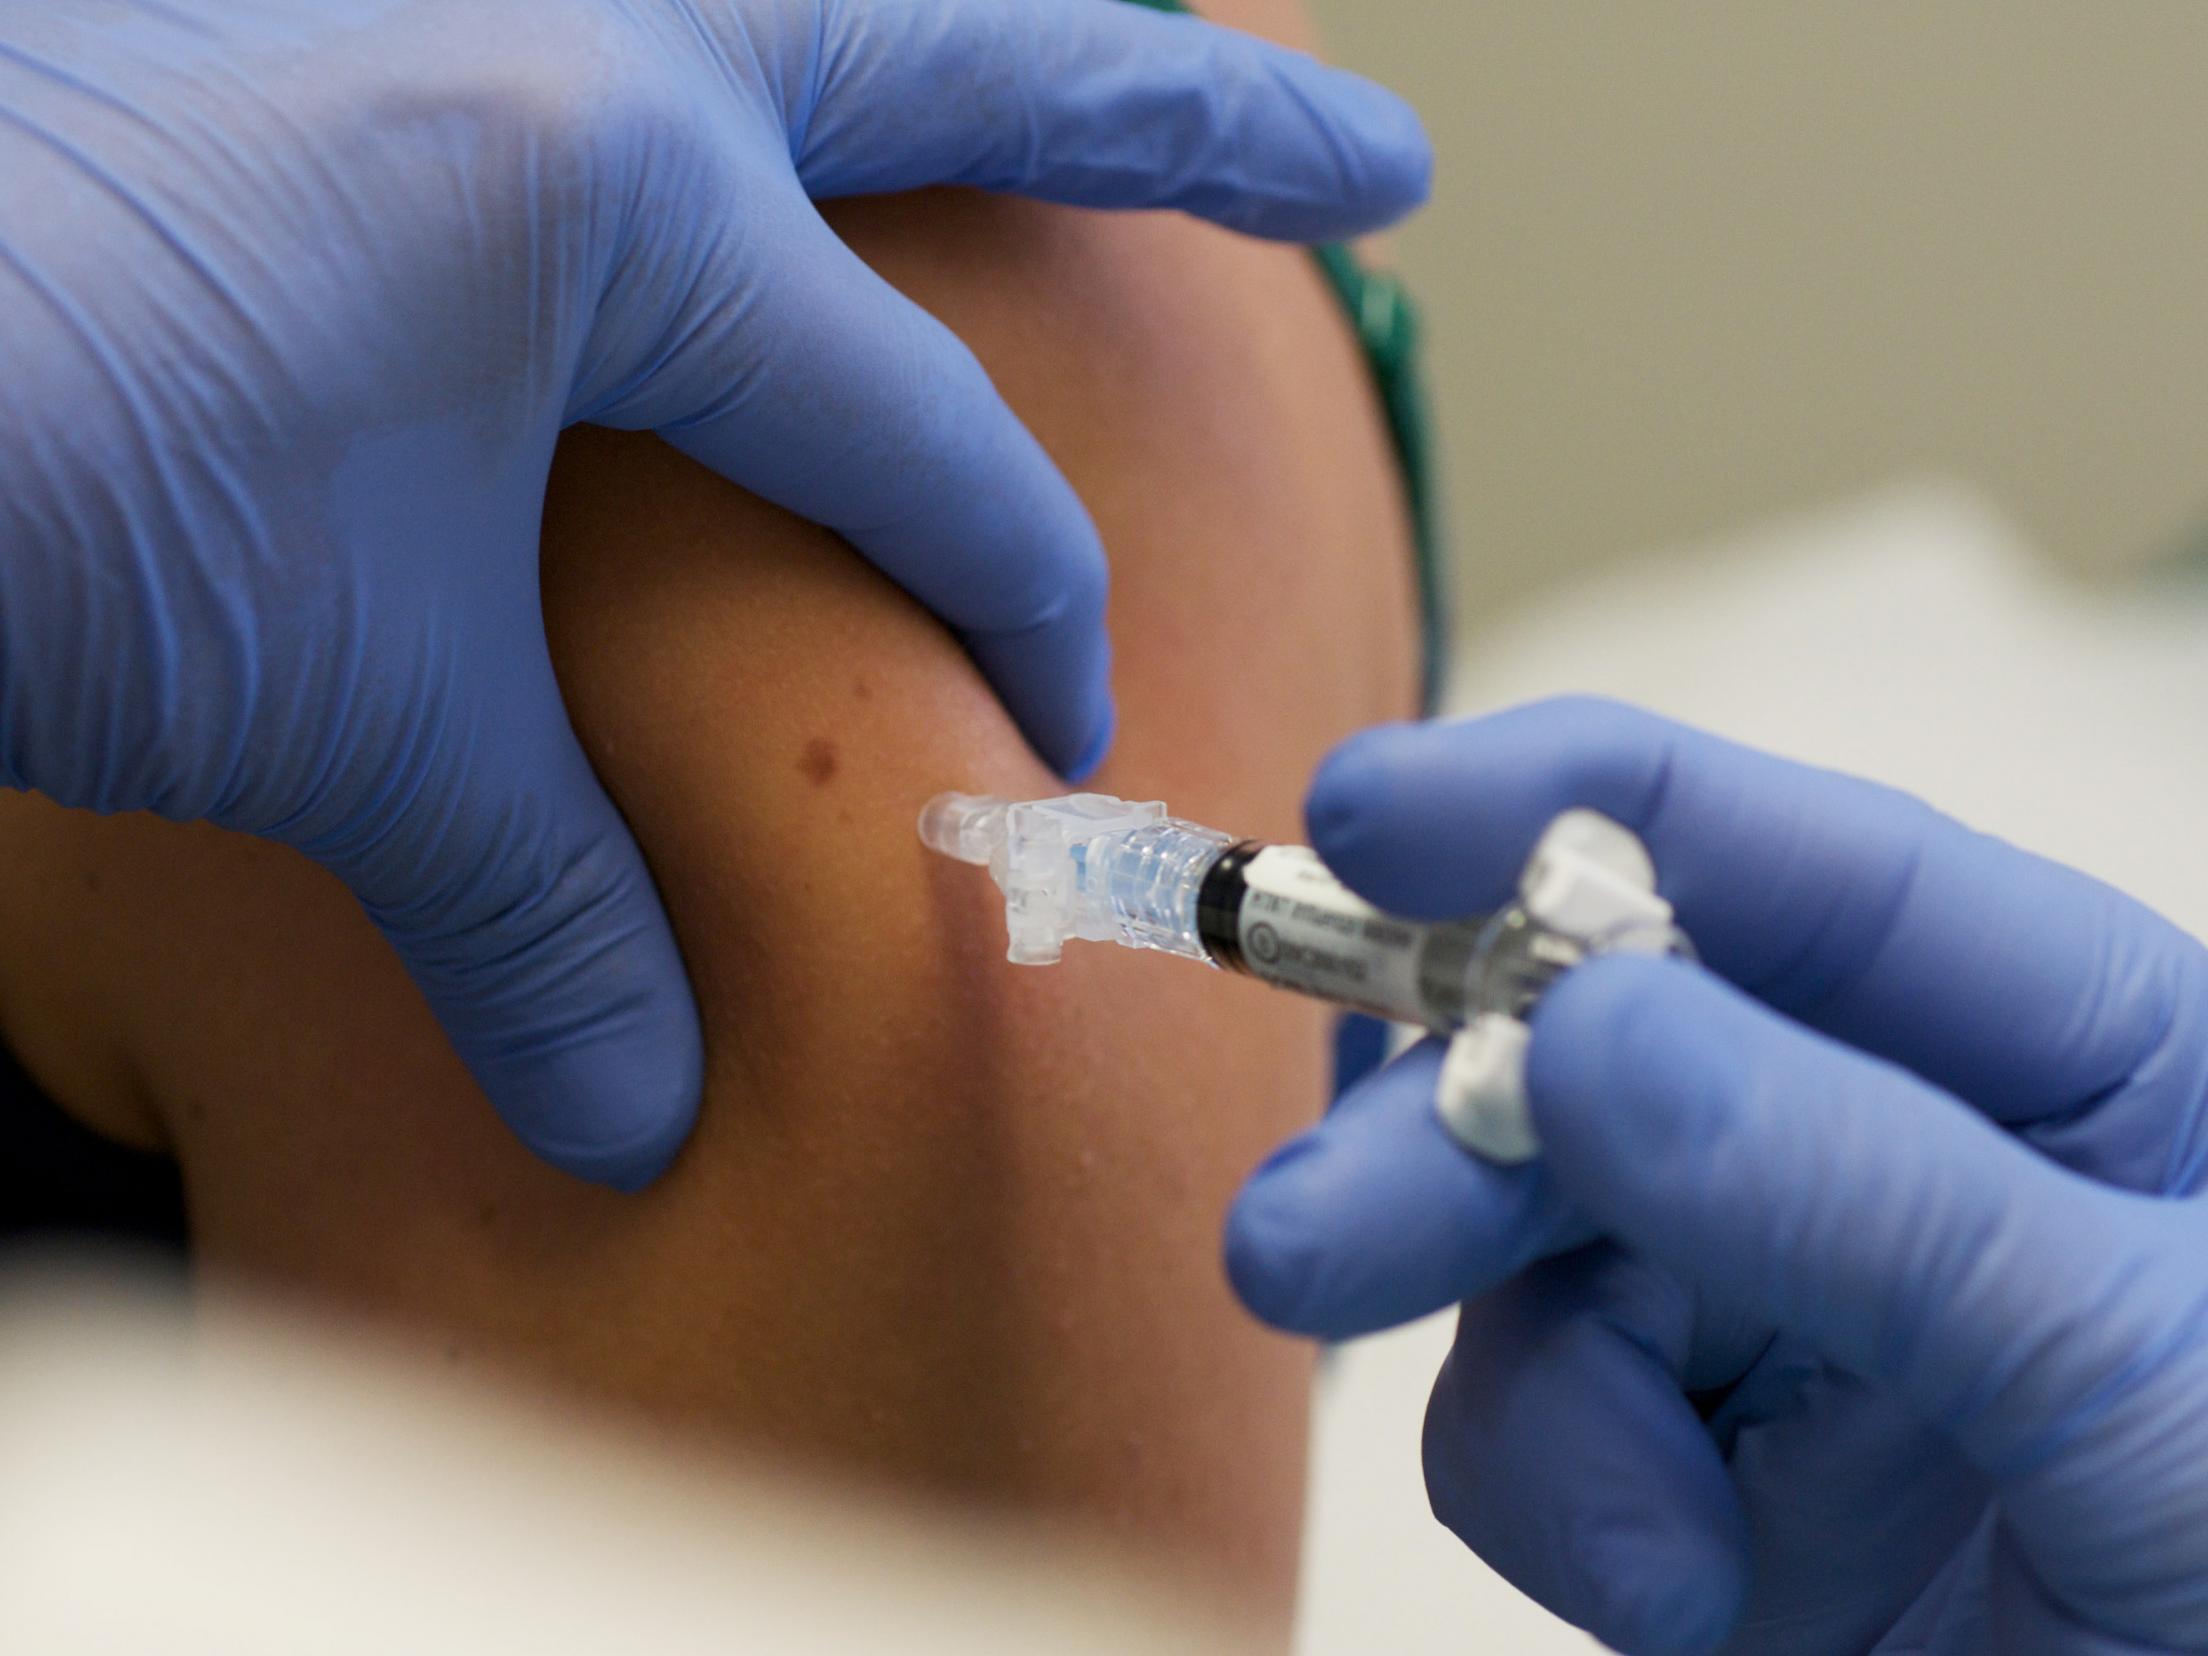 Patients would receive twice-yearly injections of the treatment